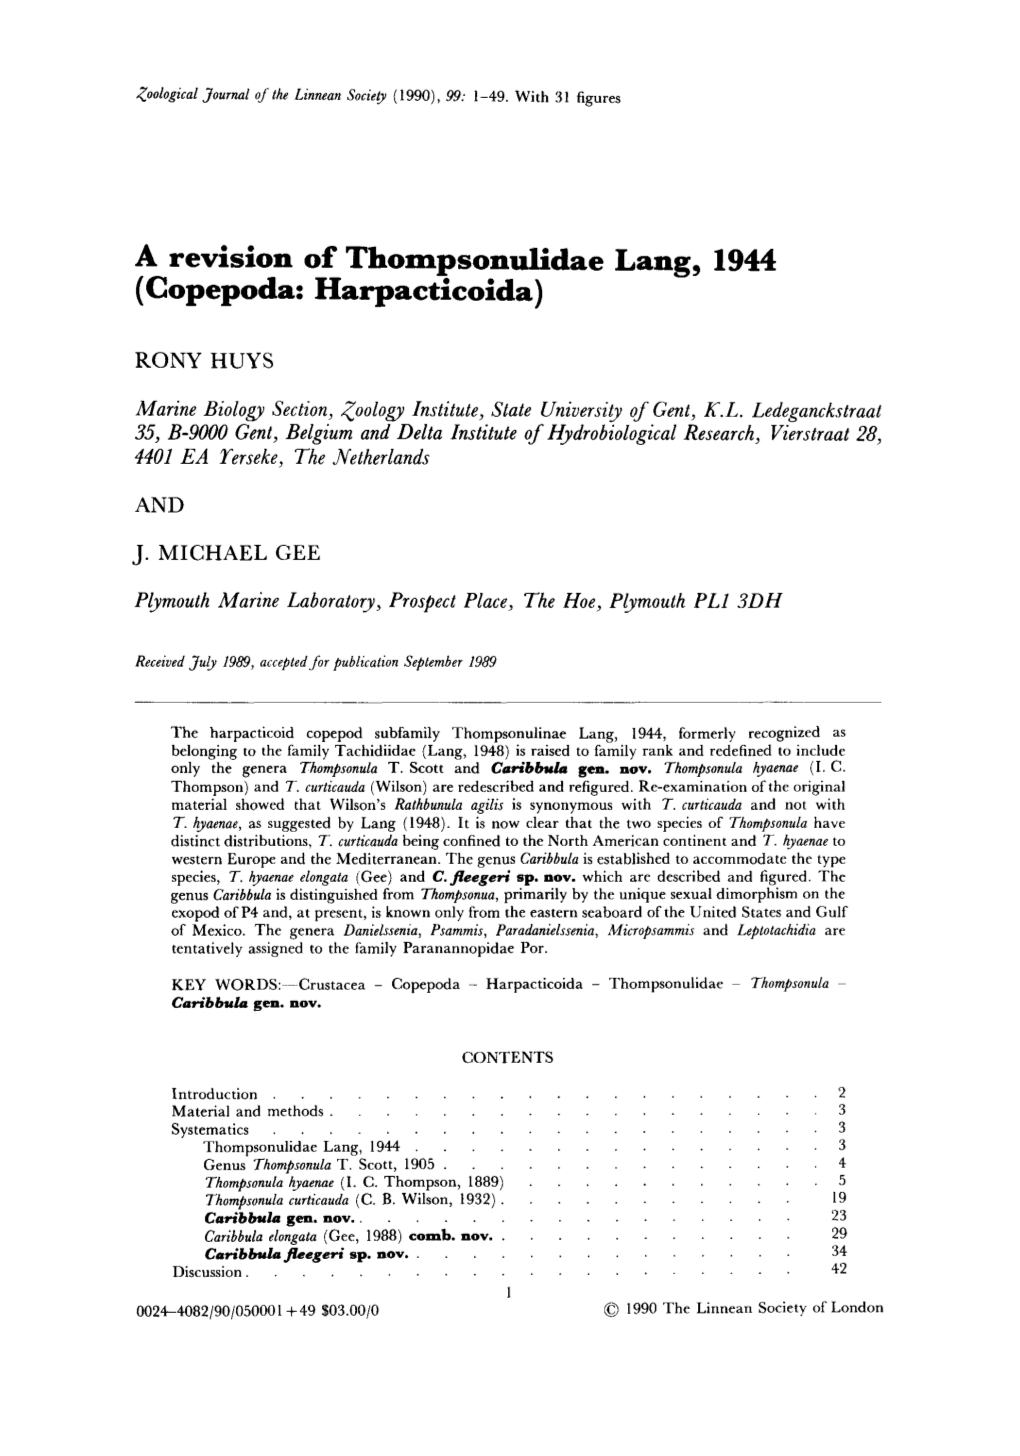 A Revision of Thompsonulidae Lang, 1944 (Copepoda: Harpacticoida)